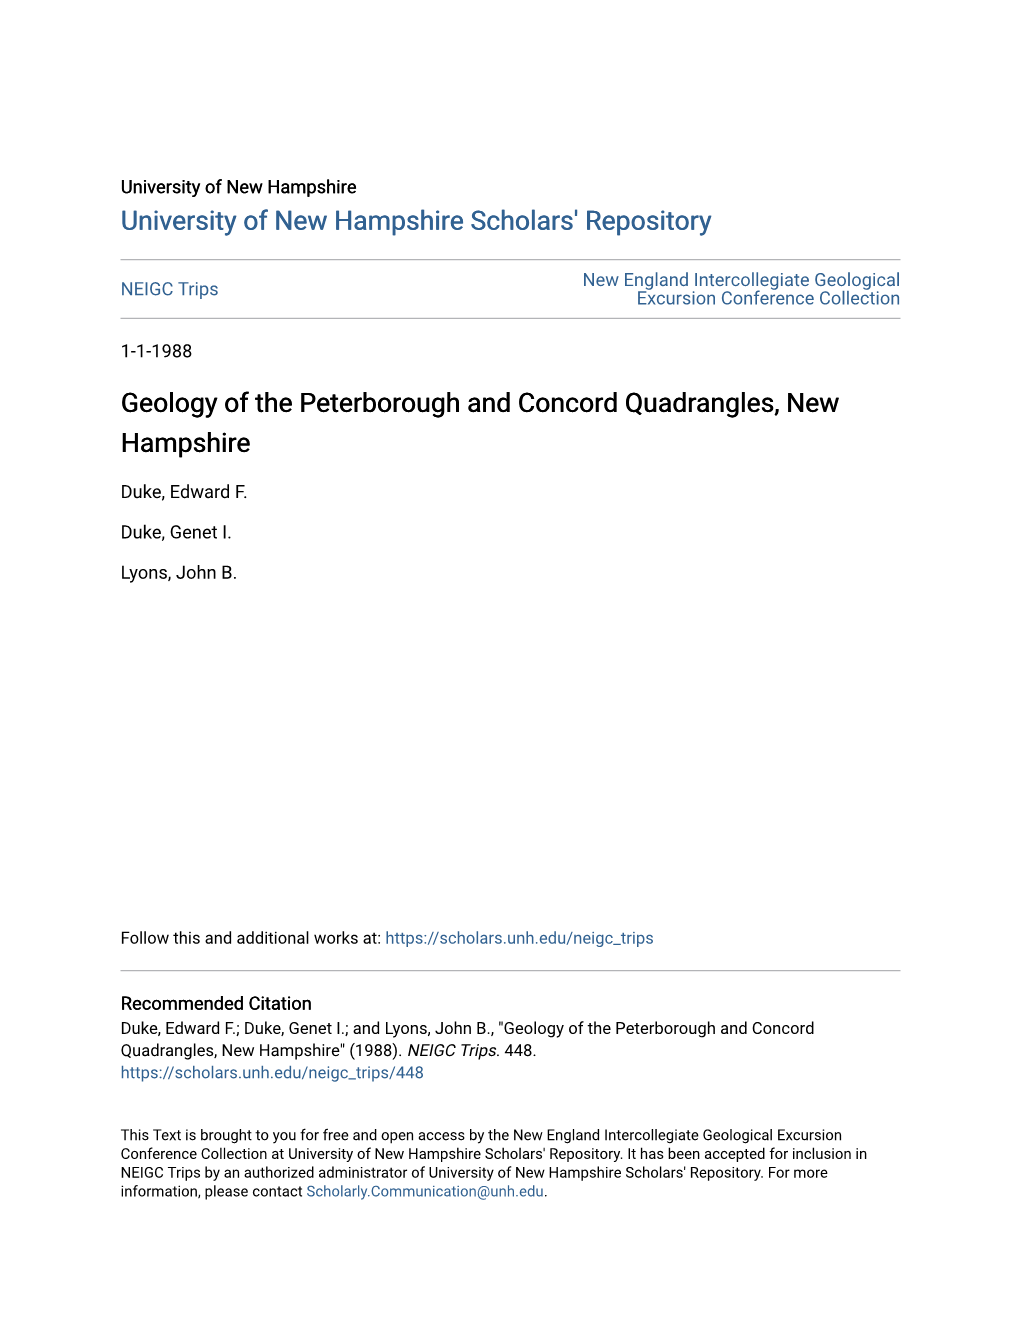 Geology of the Peterborough and Concord Quadrangles, New Hampshire